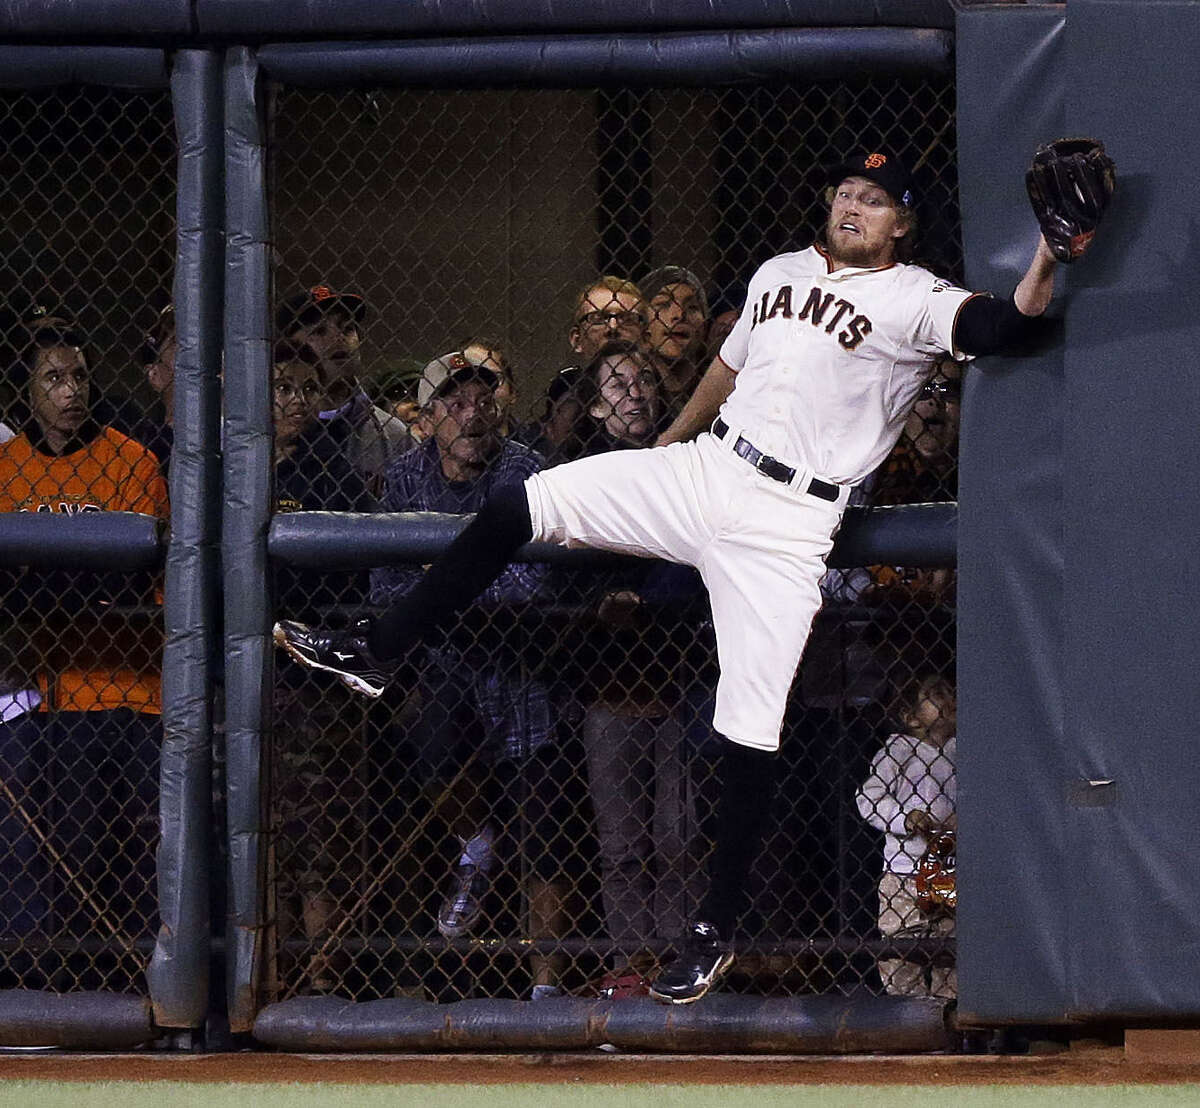 The Giants' Hunter Pence makes a difficult catch against the wall in the sixth inning as fans look on during San Francisco's series-clinching victory over the Nationals on Tuesday night at AT&T Park.